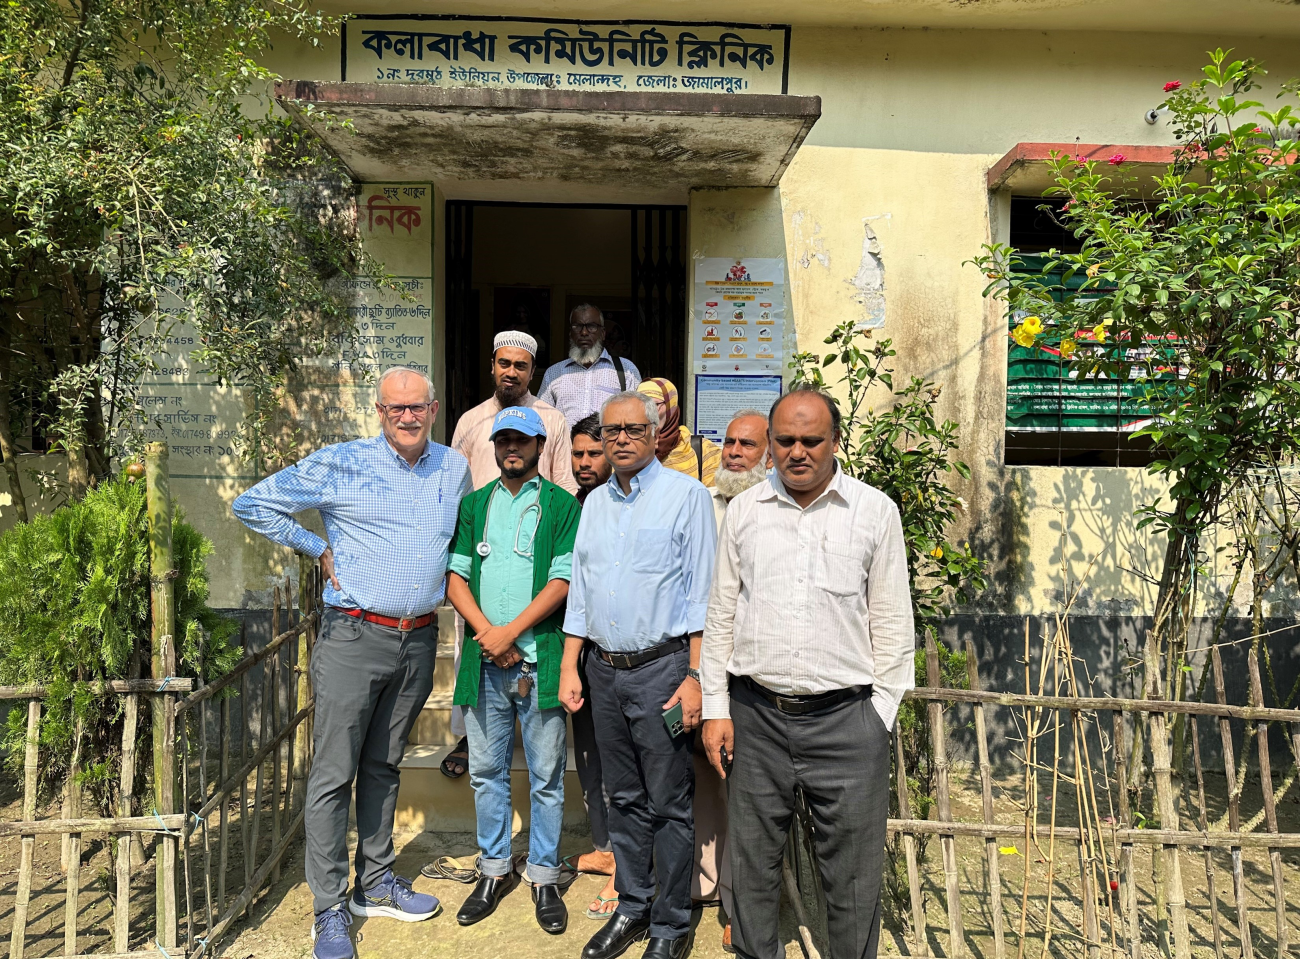 Dr. Larry Apple, MD, PhD, Director of the Resolve to Save Lives Project at Johns Hopkins, made a site visit to the National Heart Foundation in Bangladesh.